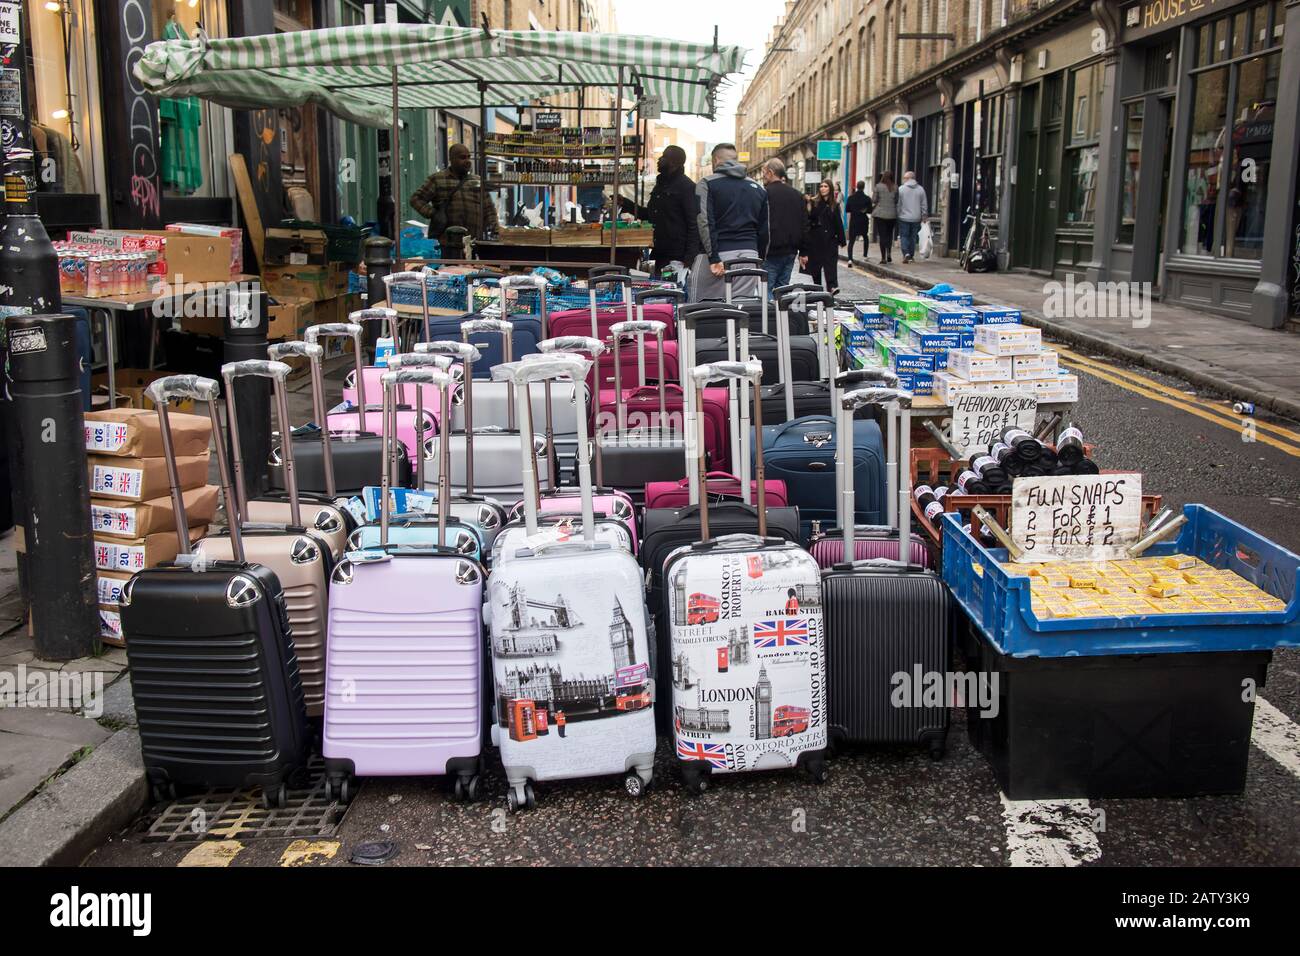 London, UK, - 23 December 2019, Cabin suitcases, garbage bags, and other items are on the road for sale in the street market. Sunday Brick Lane Market Stock Photo